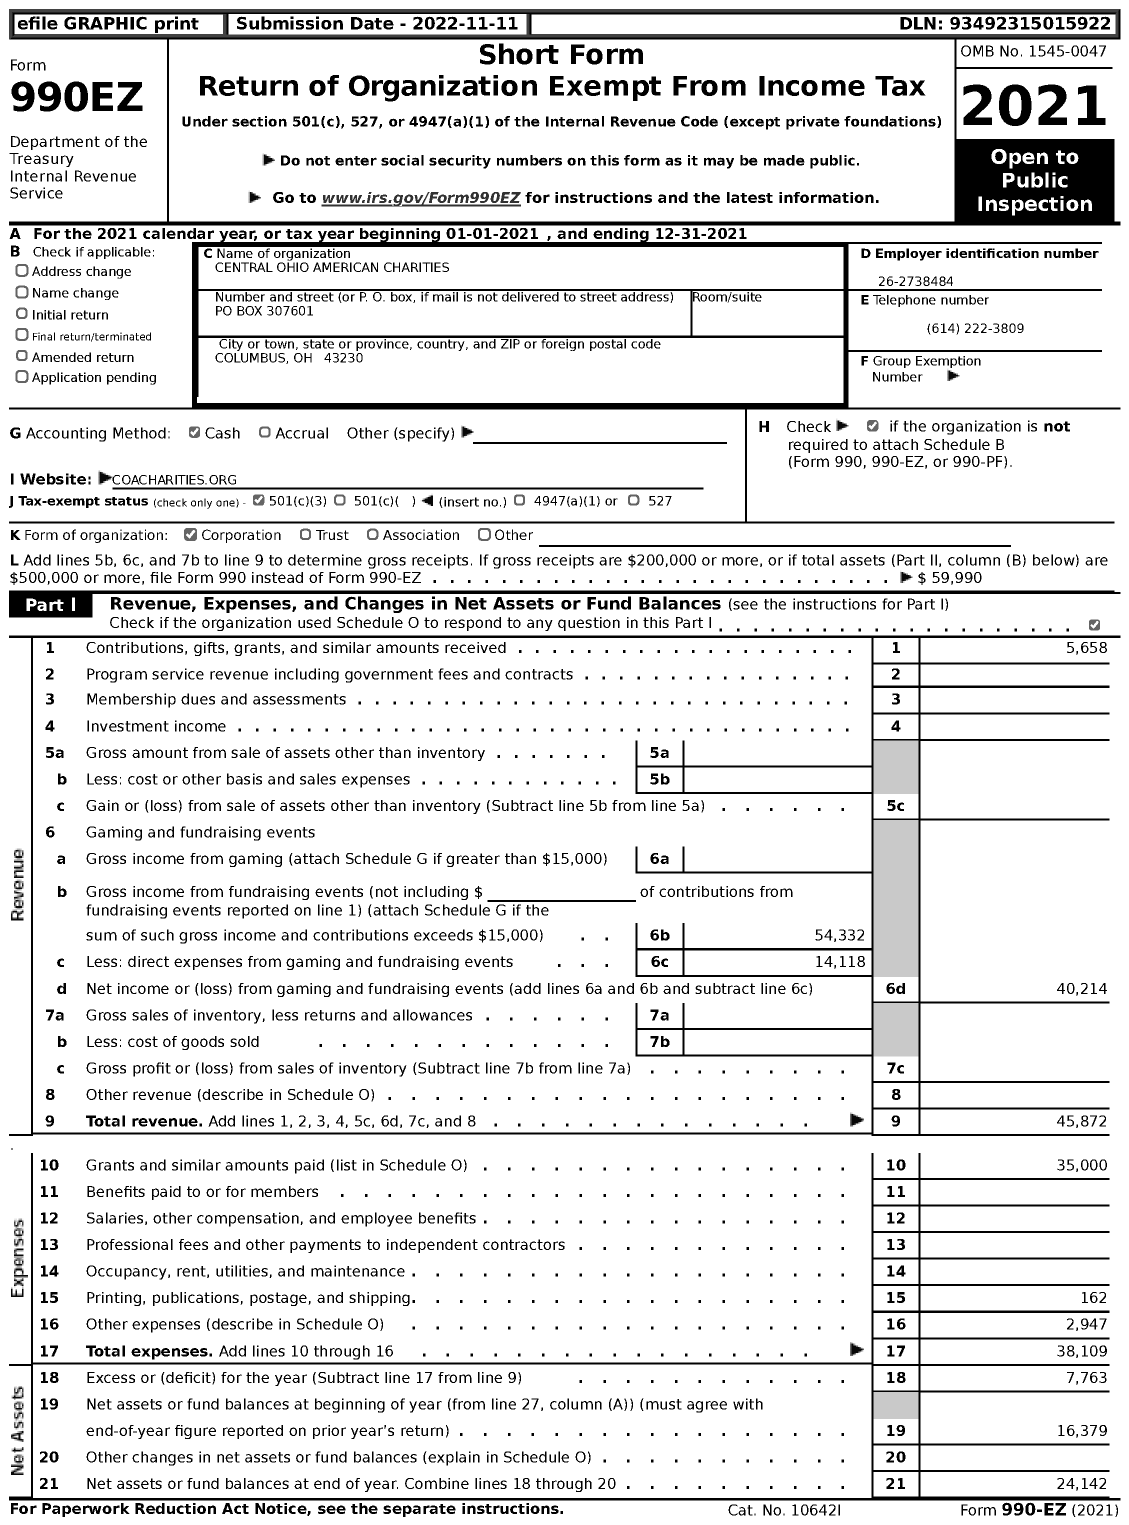 Image of first page of 2021 Form 990EZ for Central Ohio American Charities